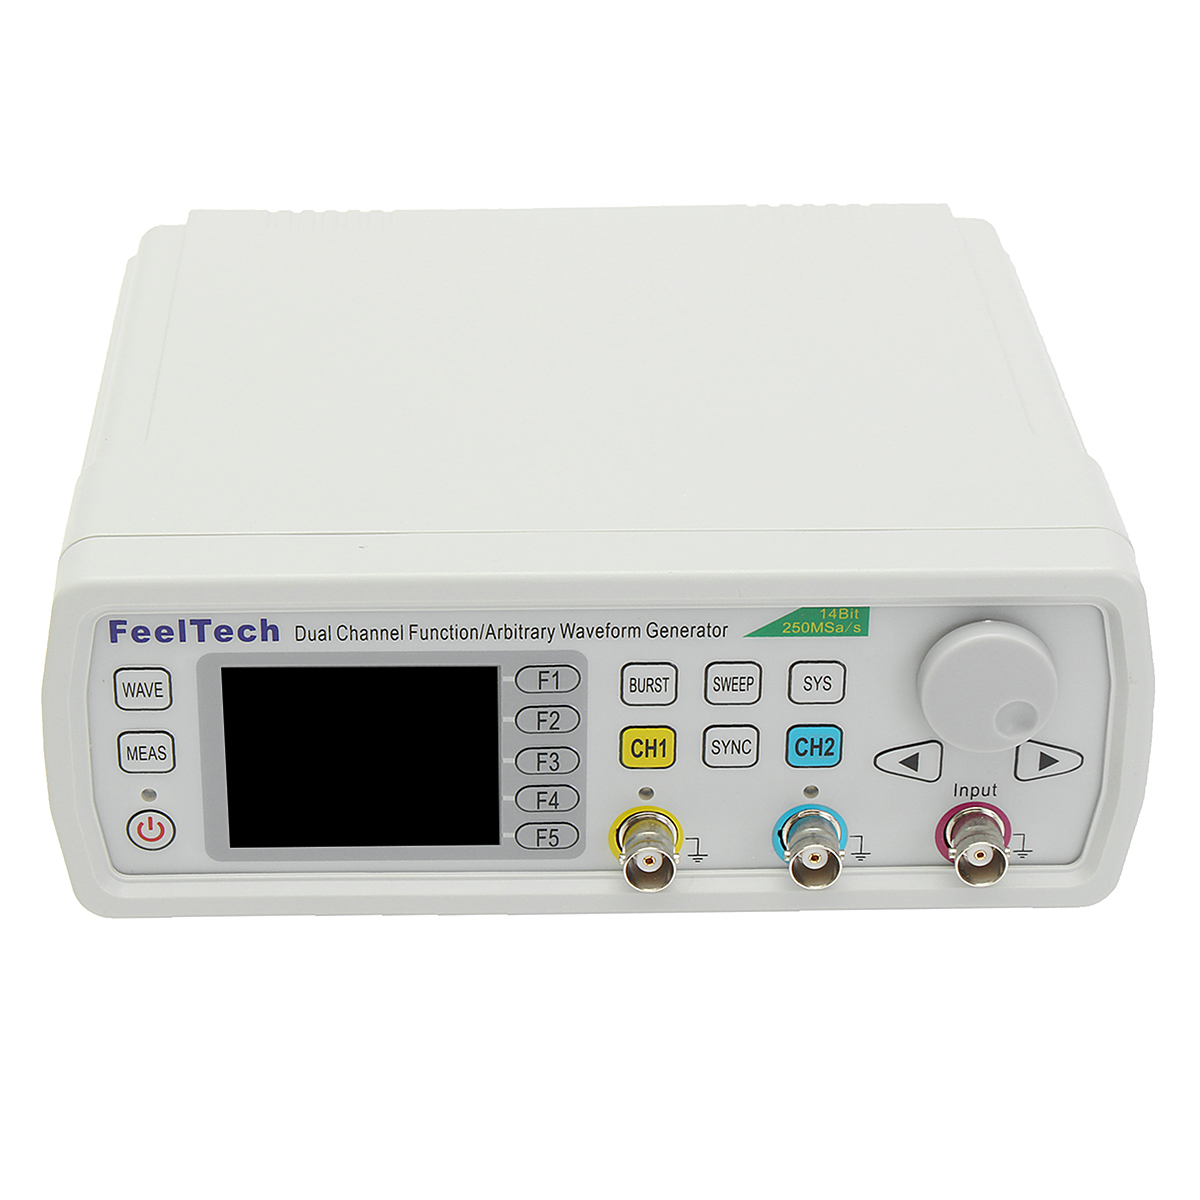 FY6600 Digital 12-60MHz Dual Channel DDS Function Arbitrary Waveform Signal Generator Frequency Meter 88